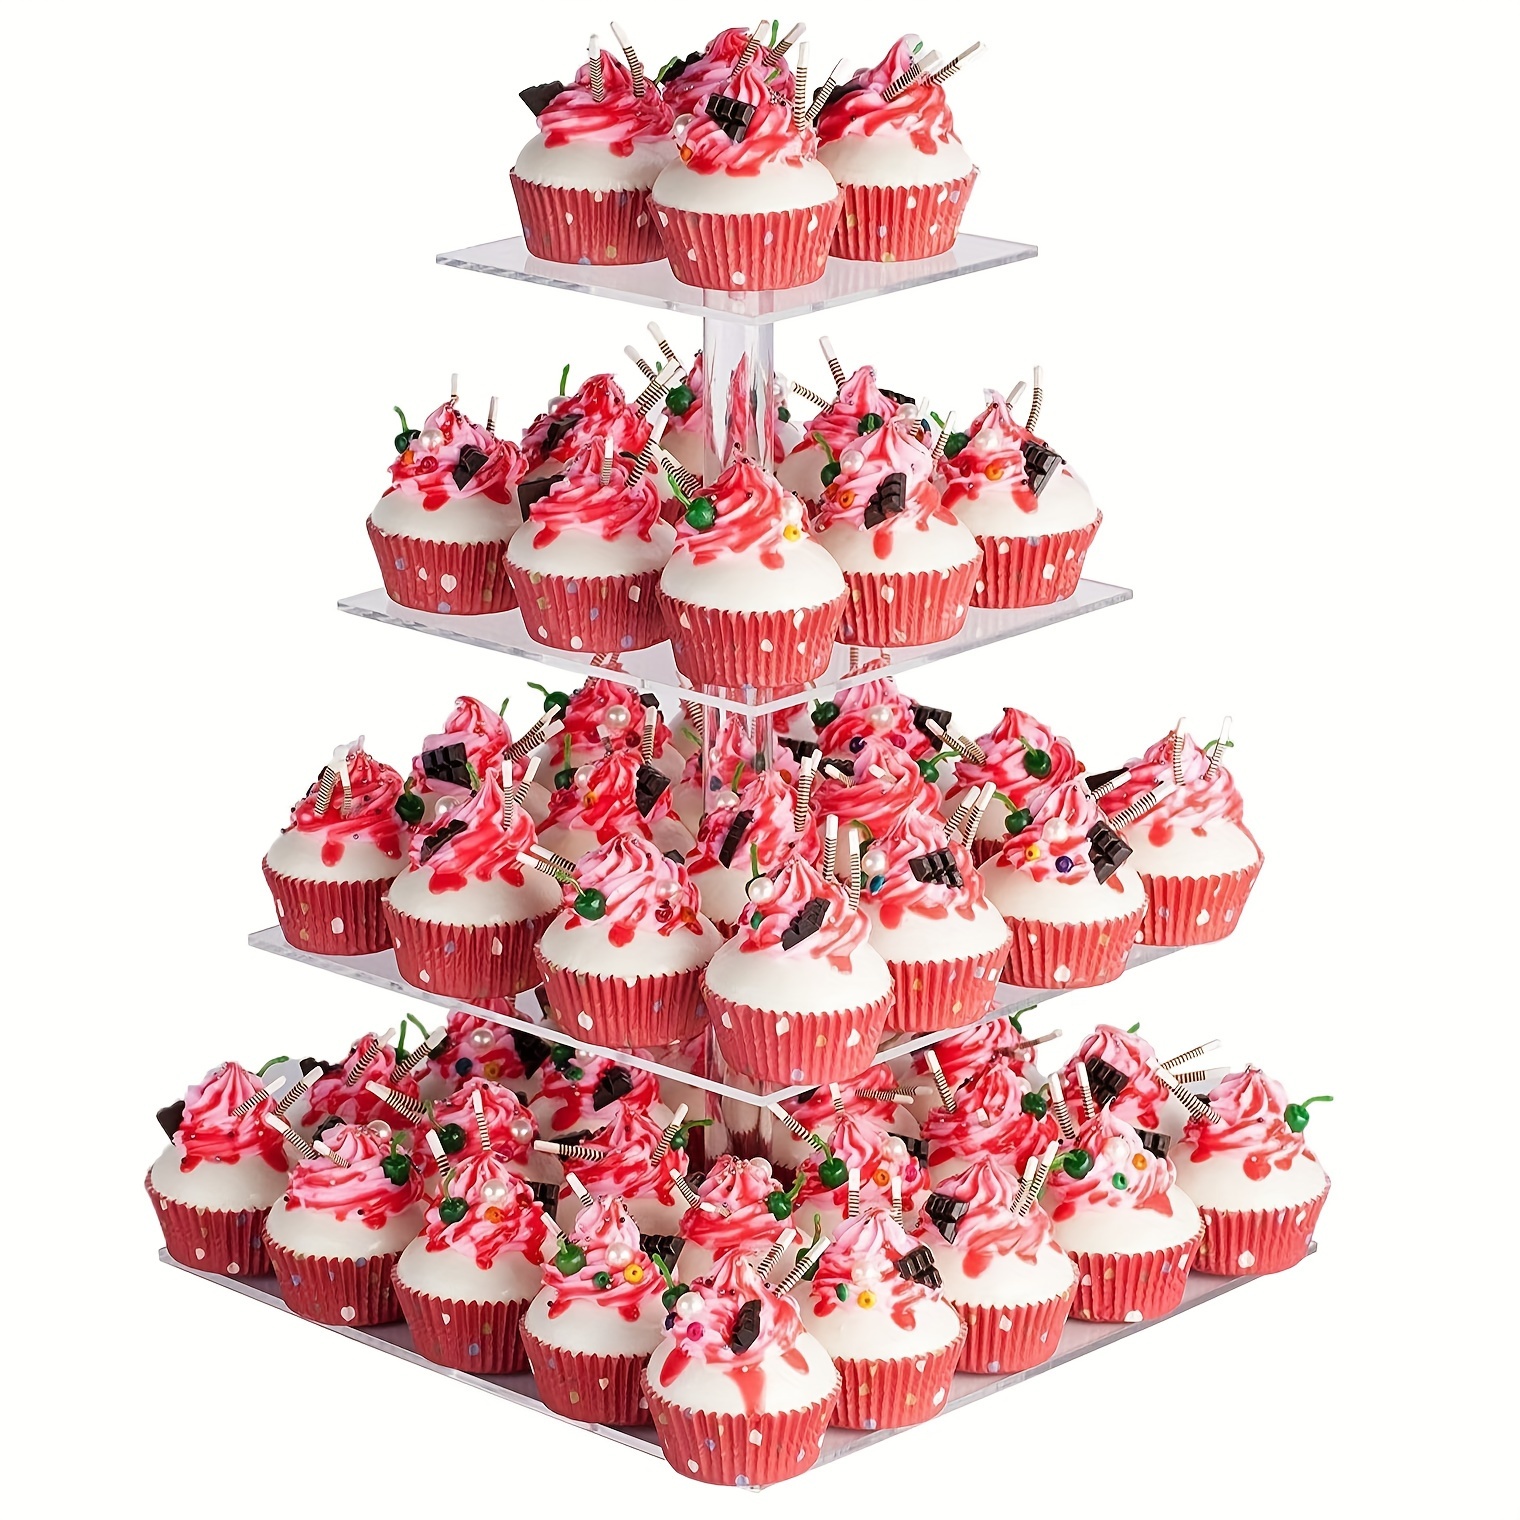 Acrylic Cupcake Stands, Large Size For 12 Cupcakes, Display Stand